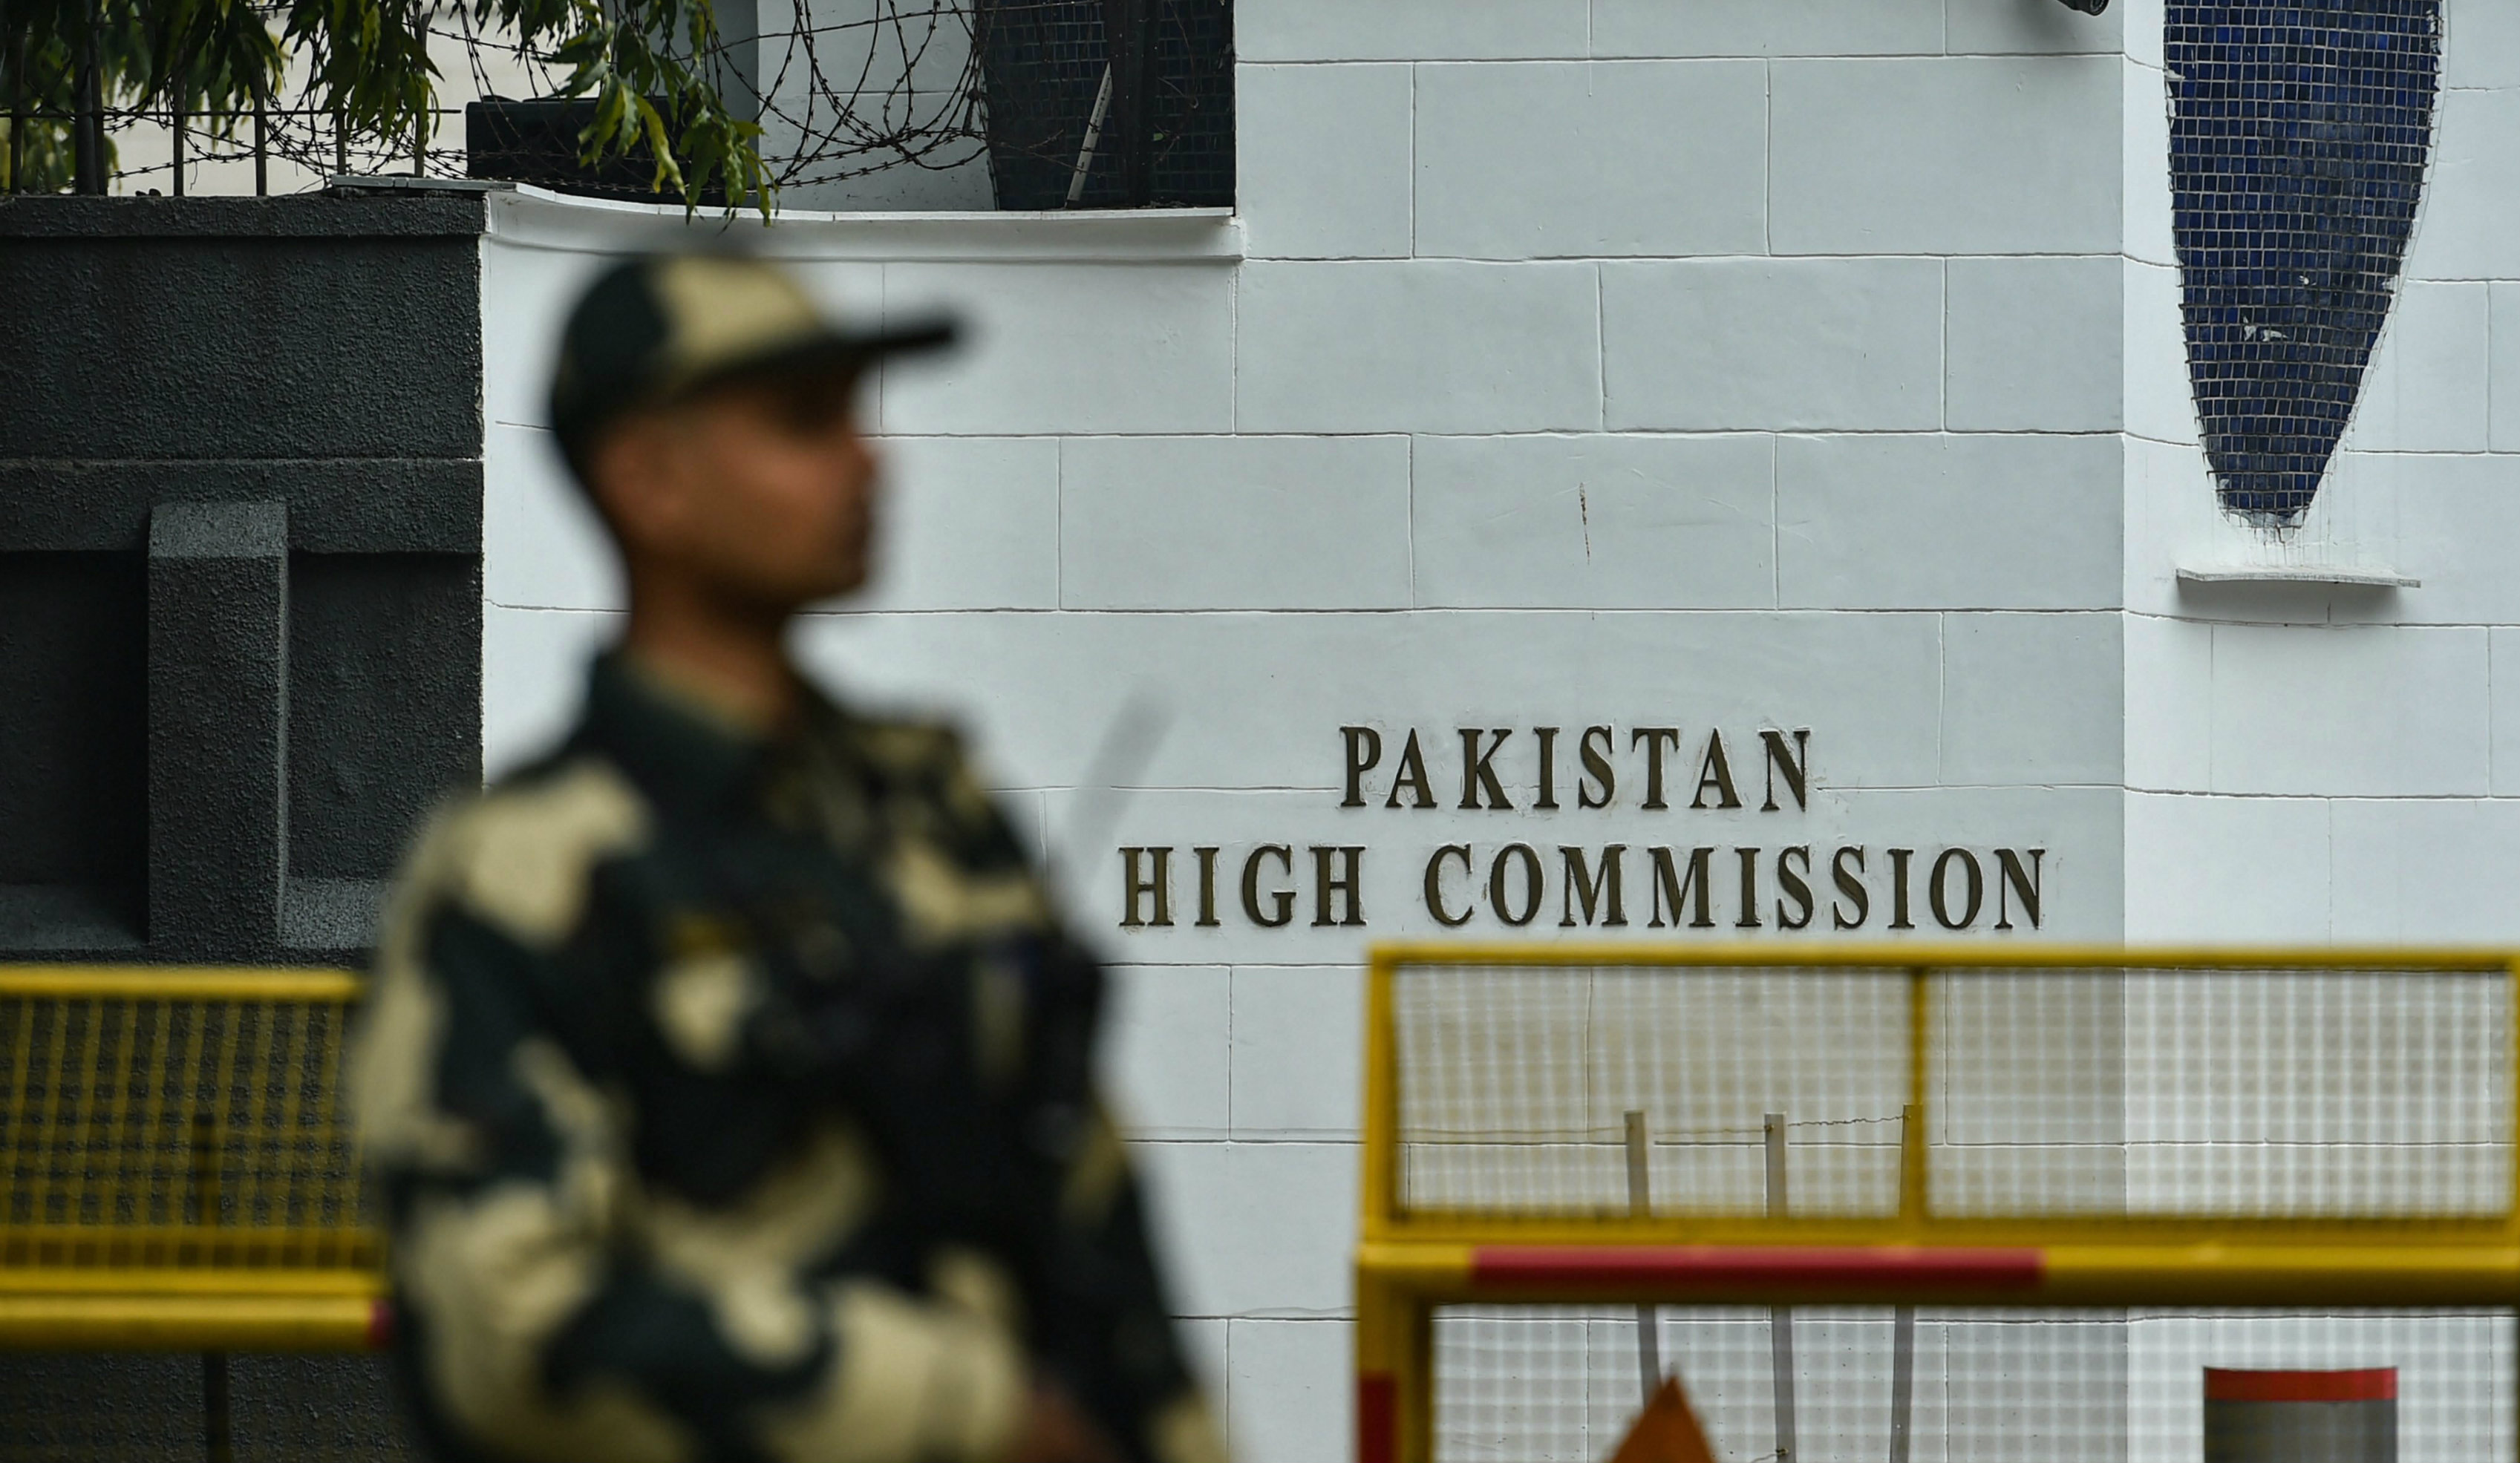 Vigil outside the Pakistan High Commission in New Delhi as security was tightened following anti-Pakistan protests in the capital after the Pulwama terror attack.